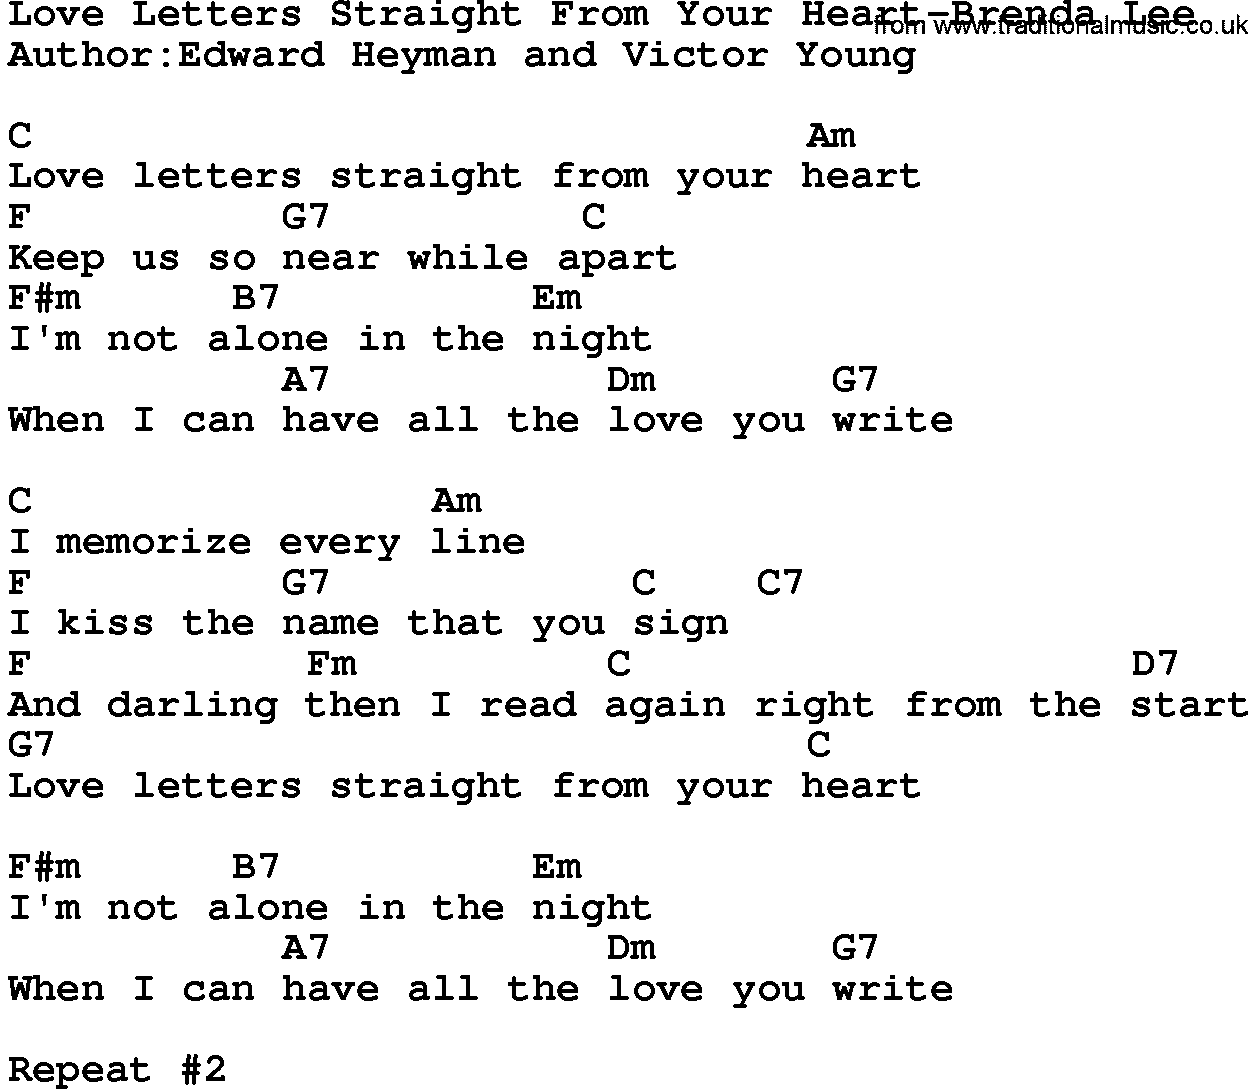 Country music song: Love Letters Straight From Your Heart-Brenda Lee lyrics and chords